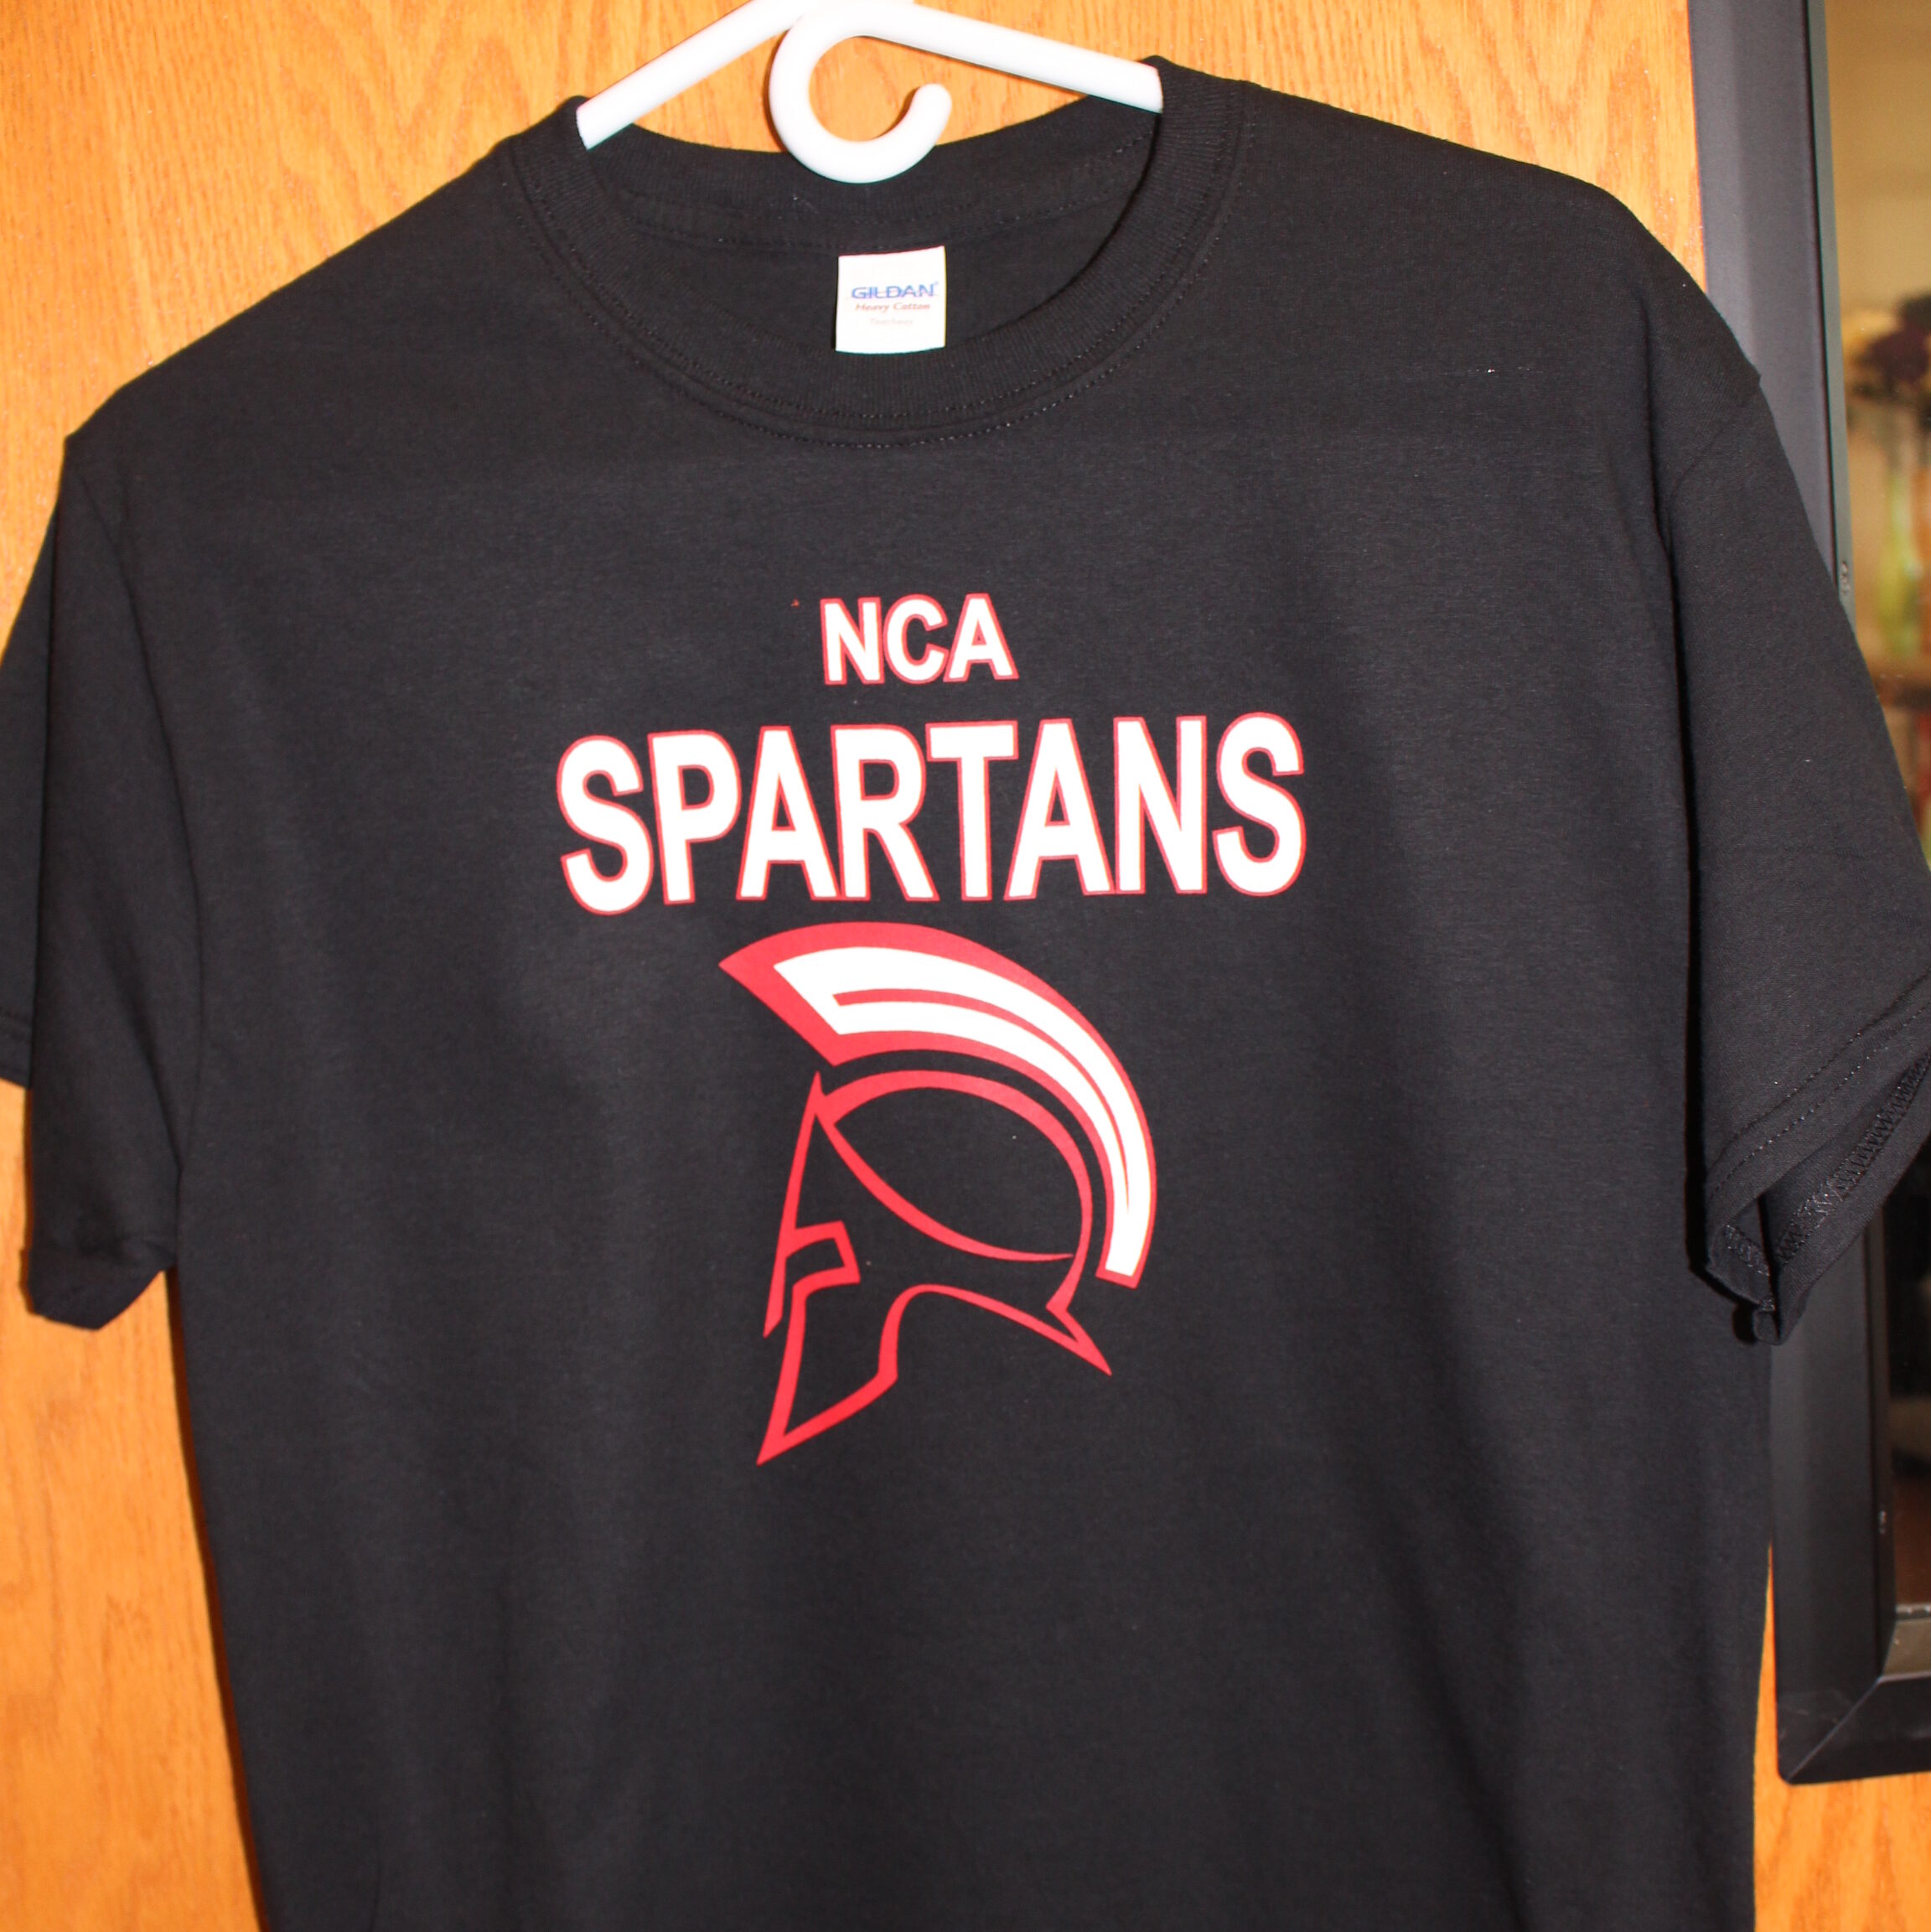 Black short sleeve t-shirt with the New Century Academy mascot on it